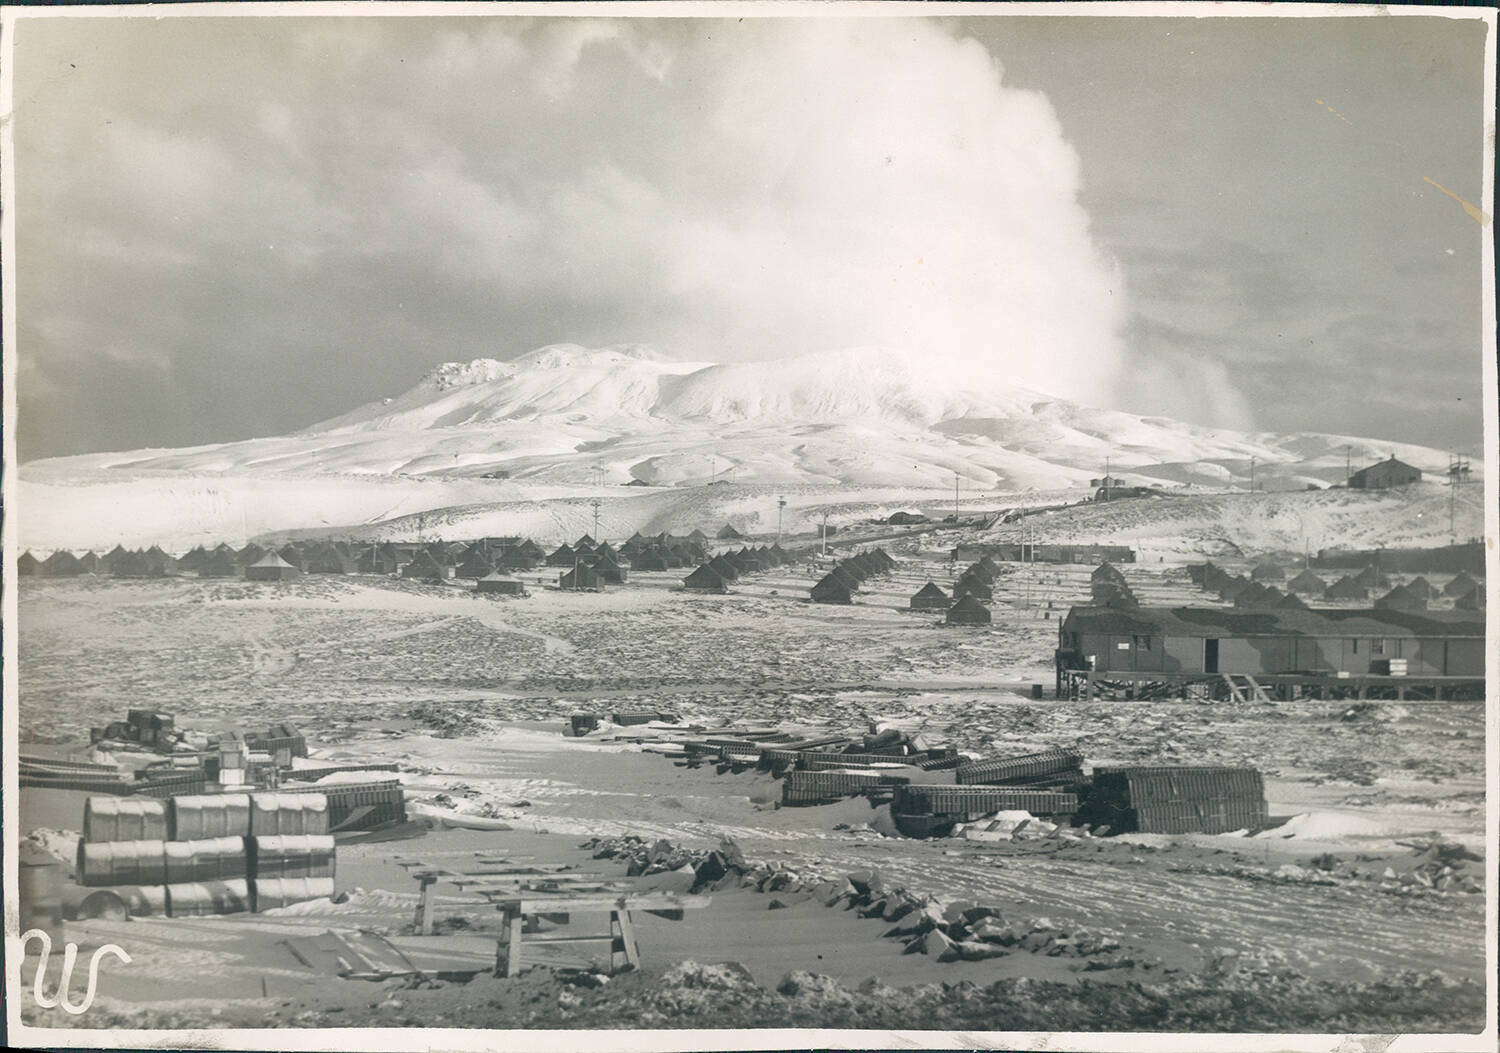 The U.S. Army and Navy base on Adak Island is seen in 1943, during World War II, in this National Park Service photo. Adak is now home to dozens of contaminated sites, and the state of Alaska has filed a lawsuit that seeks to have the federal government take responsibility for cleaning sites on Adak and across Alaska. (Photo provided by the National Park Service)